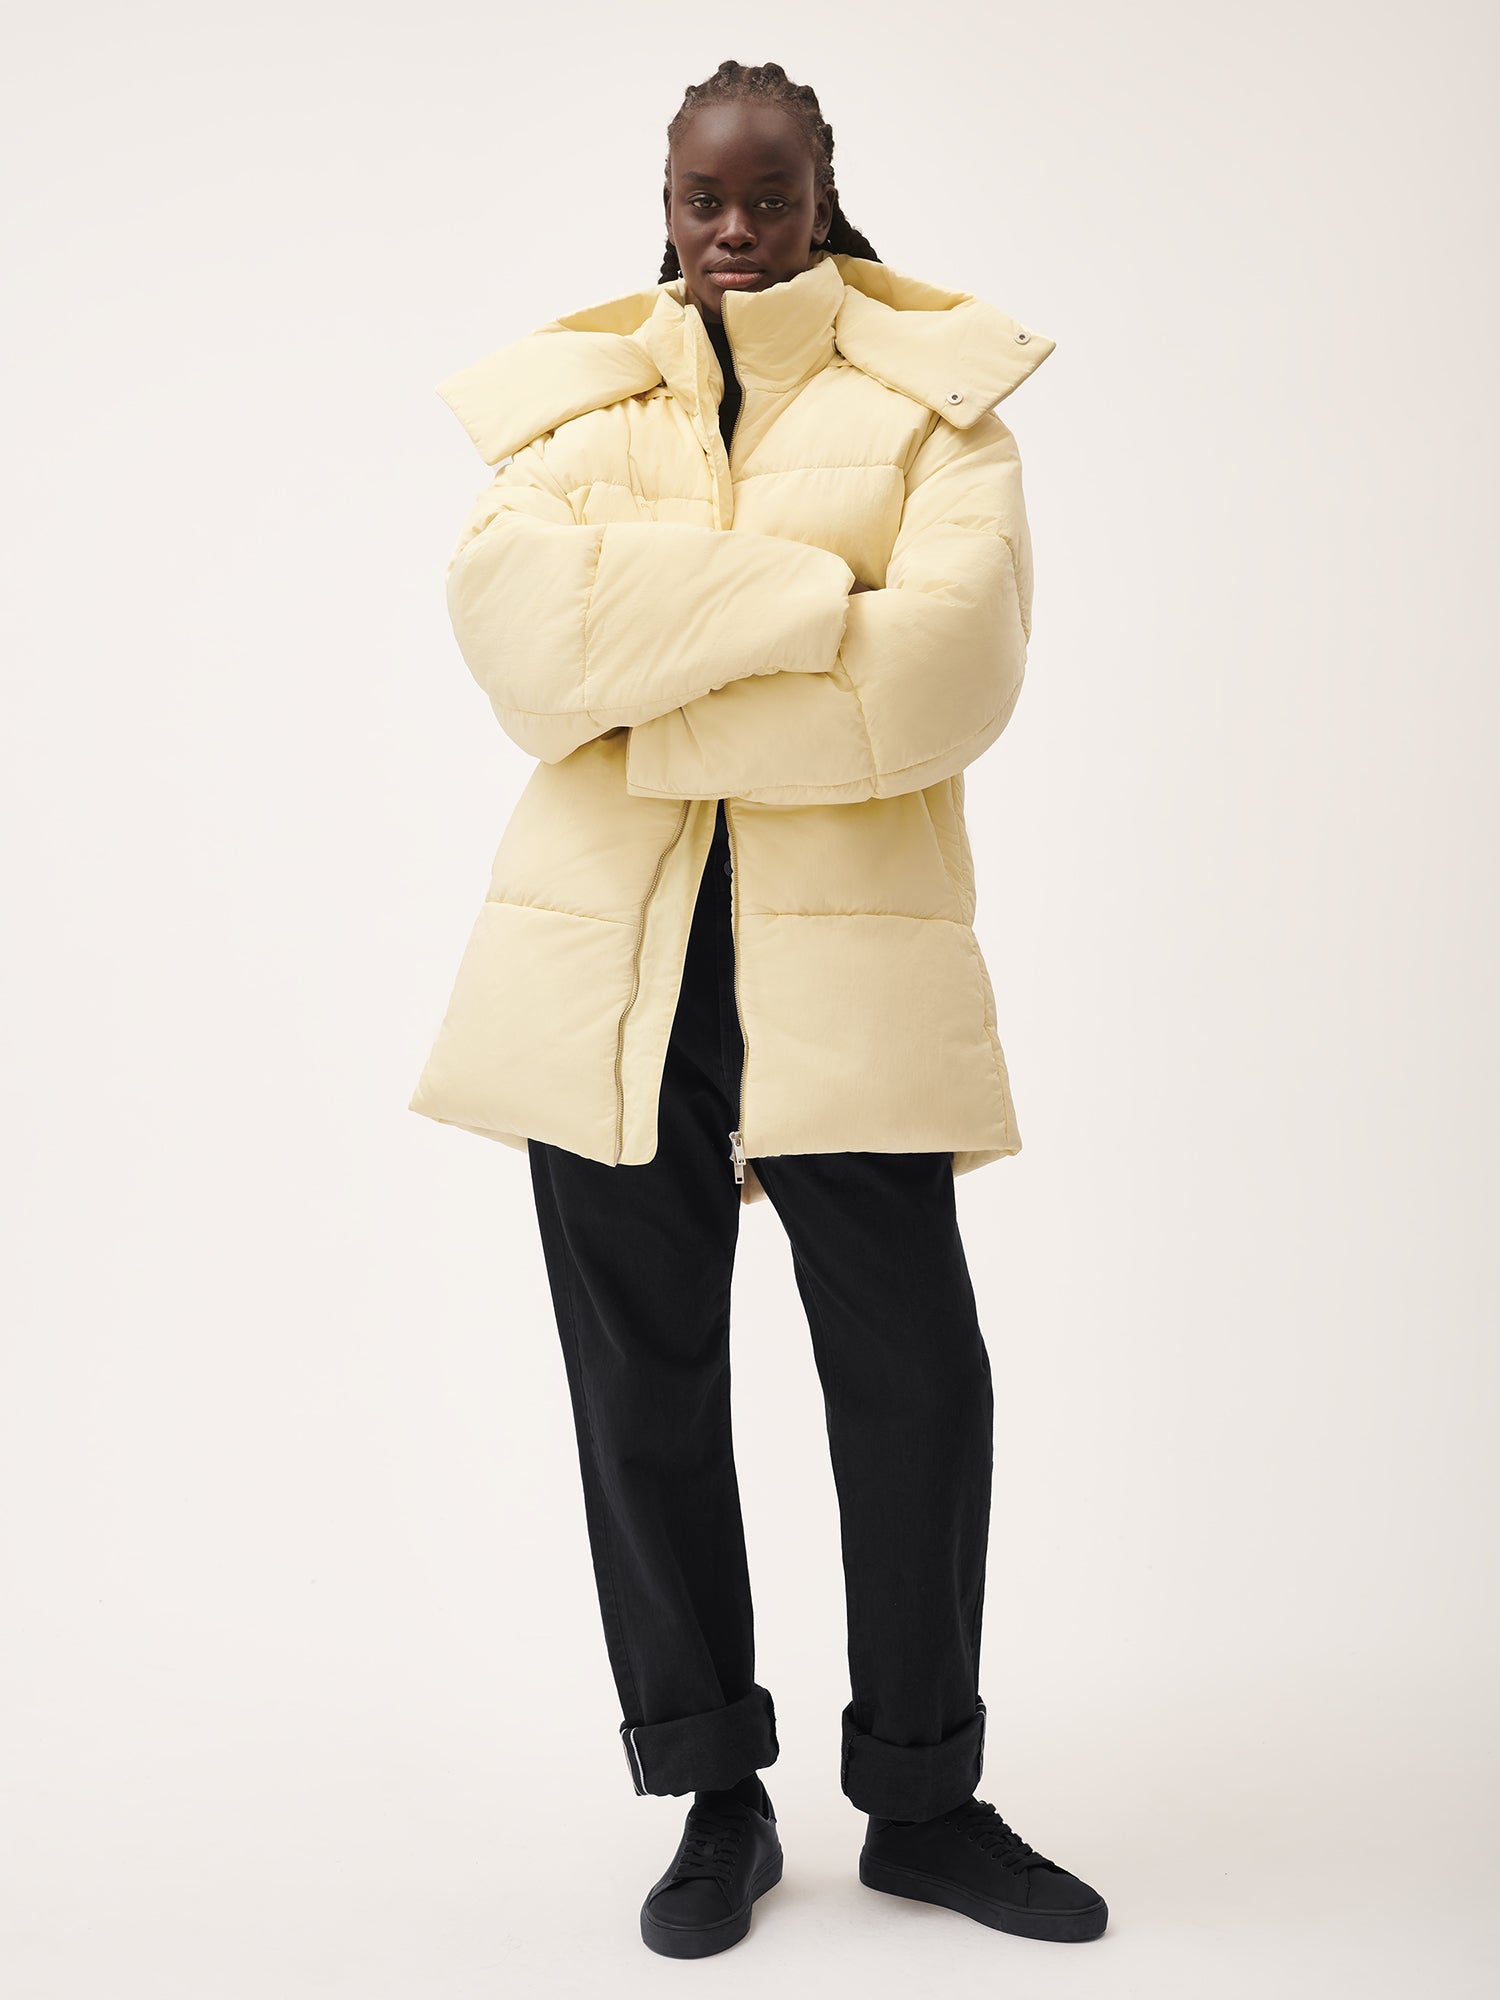 FLWRDWN_Recycle_Nylon_Exaggerated_Long_Puffer_Rind_Yellow_female-4